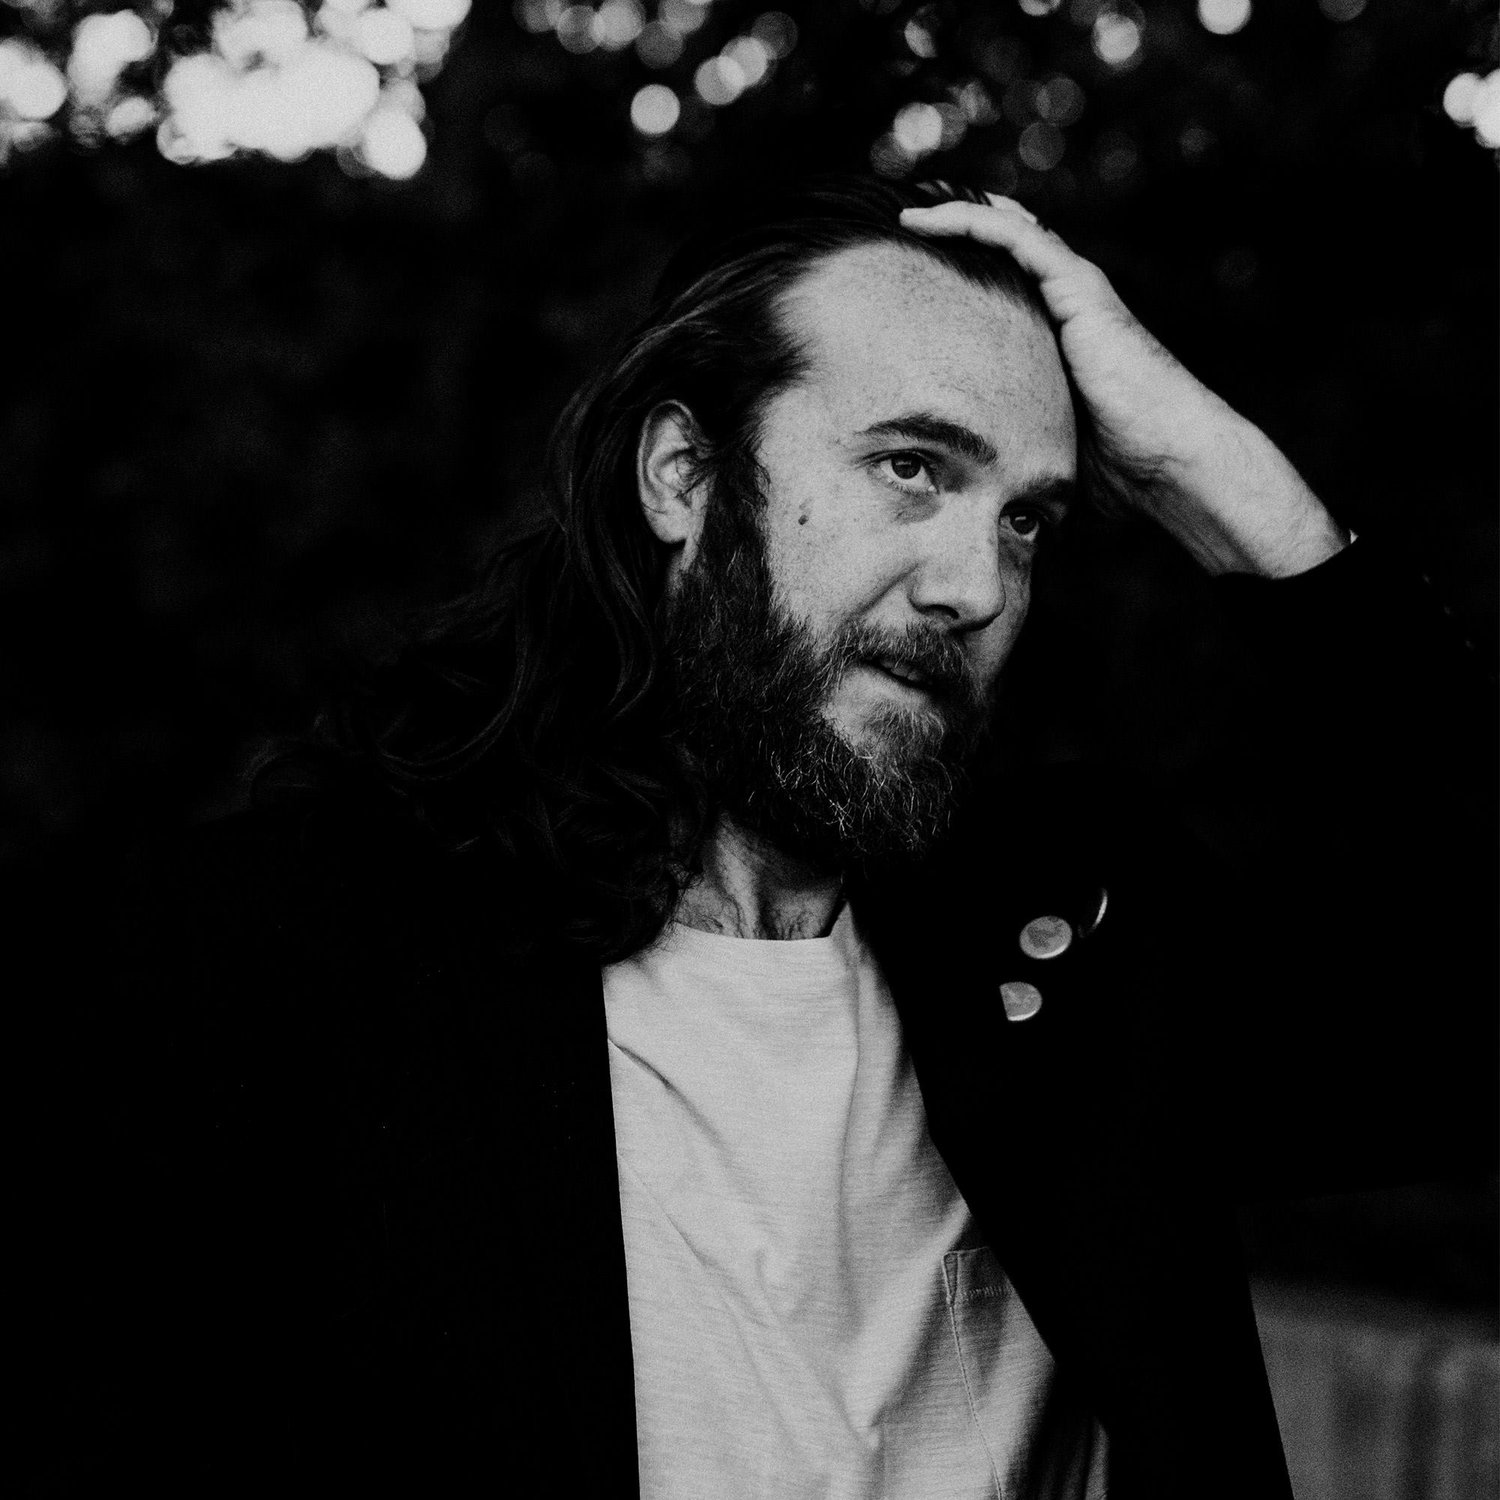 #714 - Has the Christian Worship Scene Become Commercialized? A Conversation with John Mark McMillan